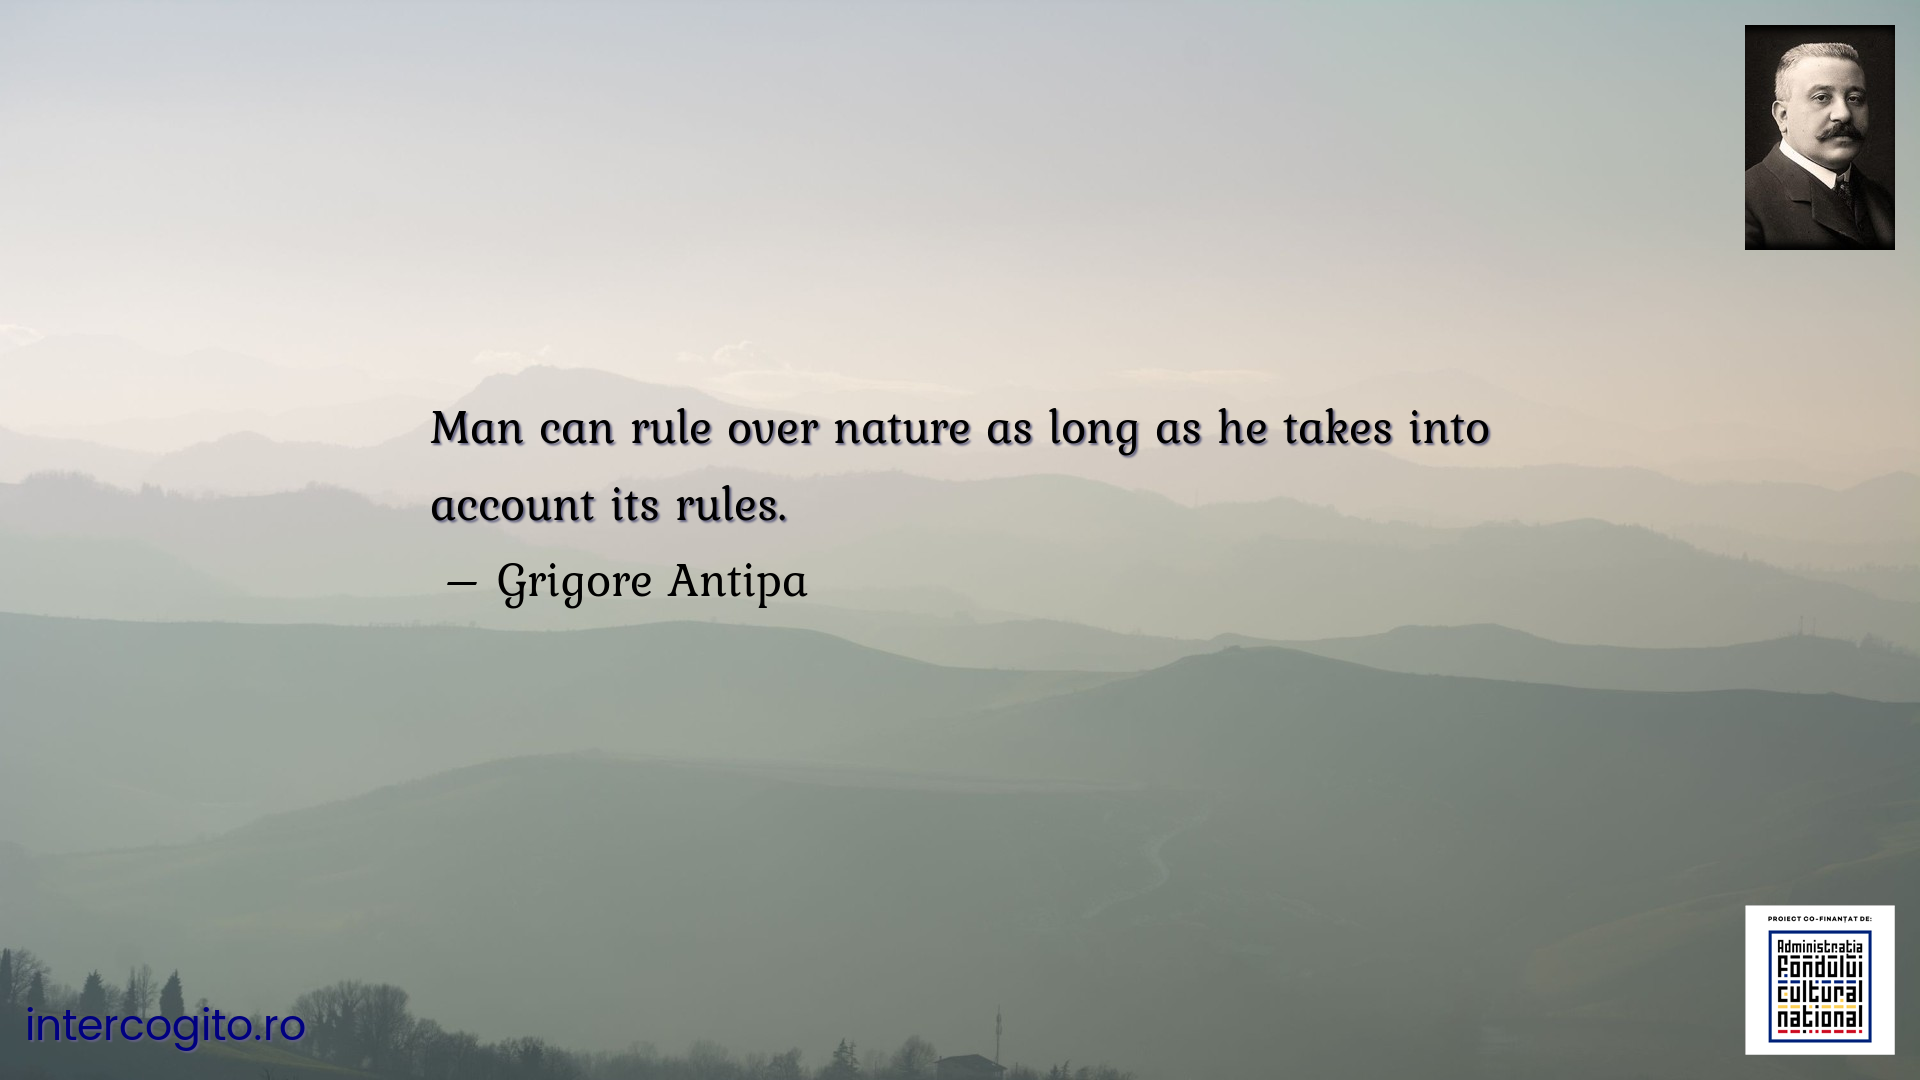 Man can rule over nature as long as he takes into account its rules.